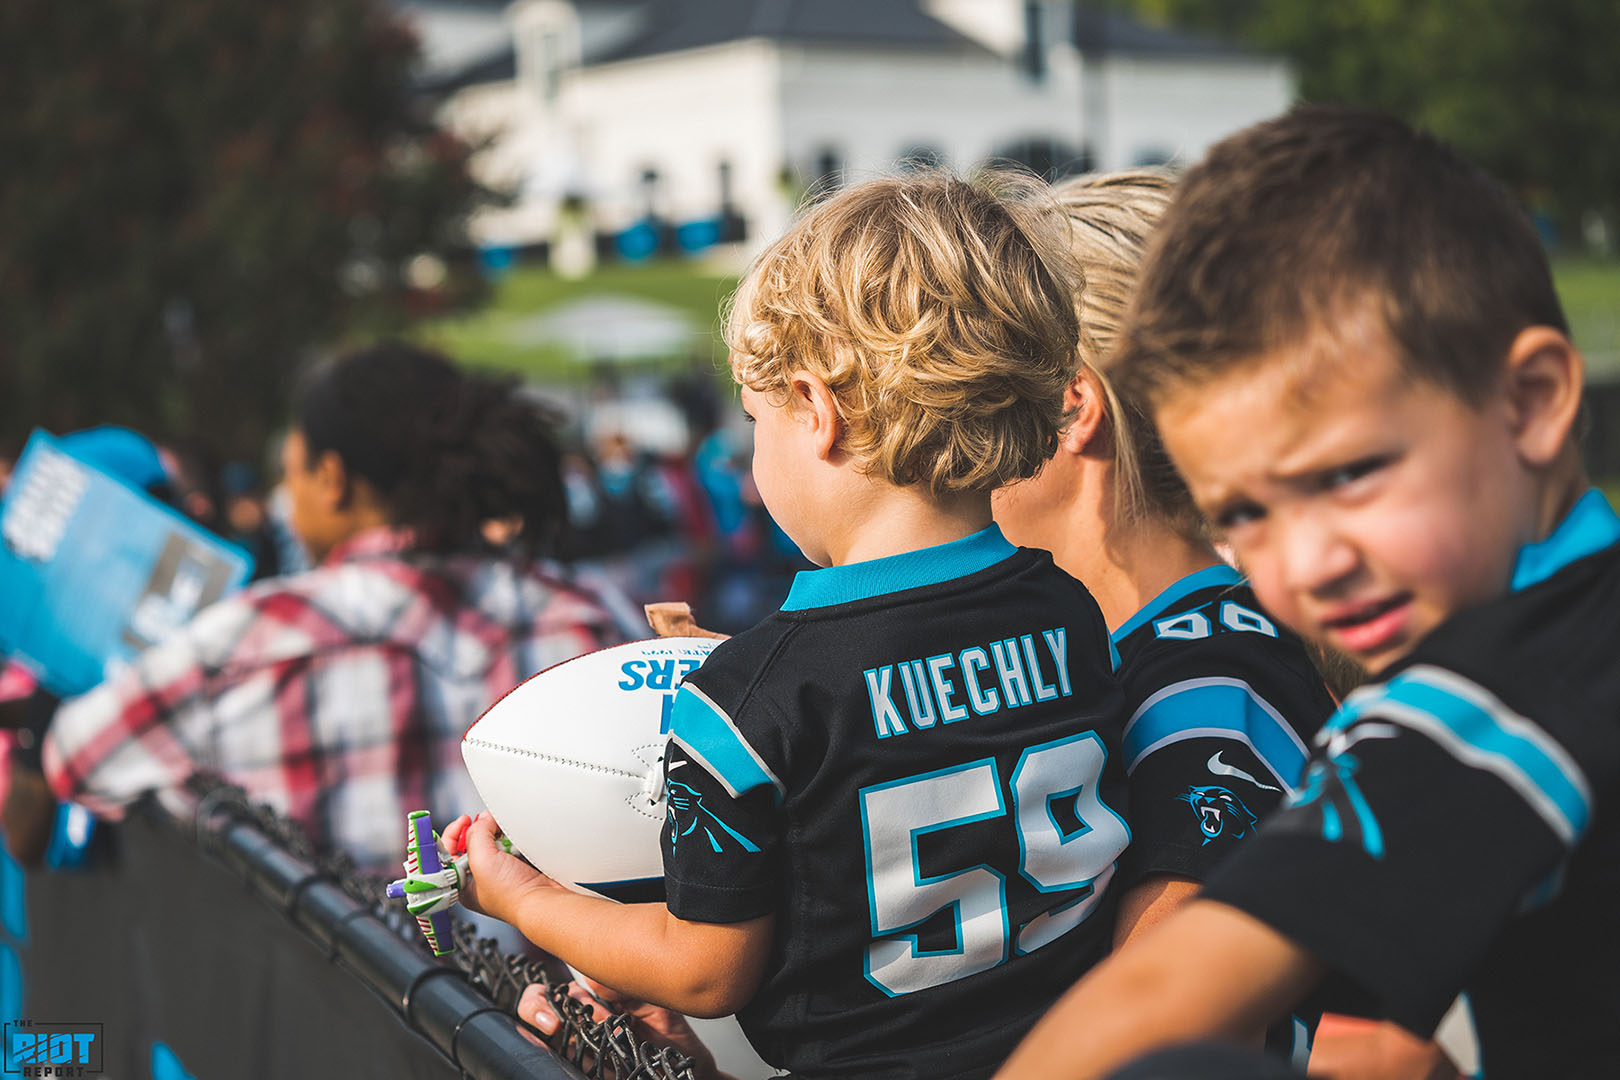 Panthers Partner With Boys & Girls Club In Multi-Year Partnership